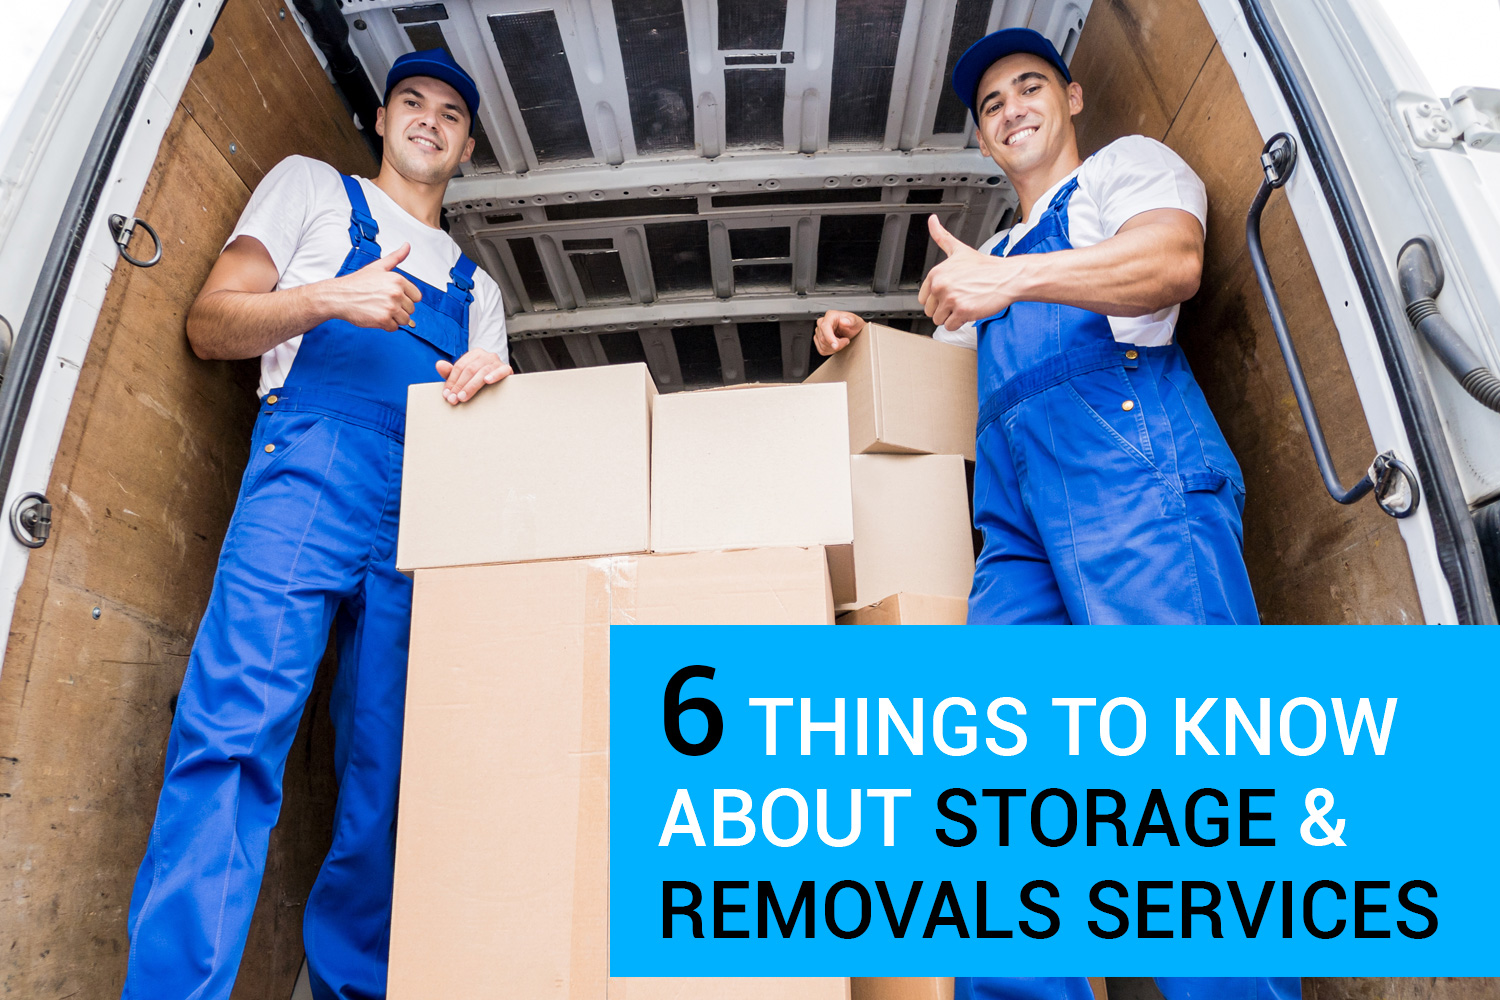 6 Things to Know About Storage and Removals Services